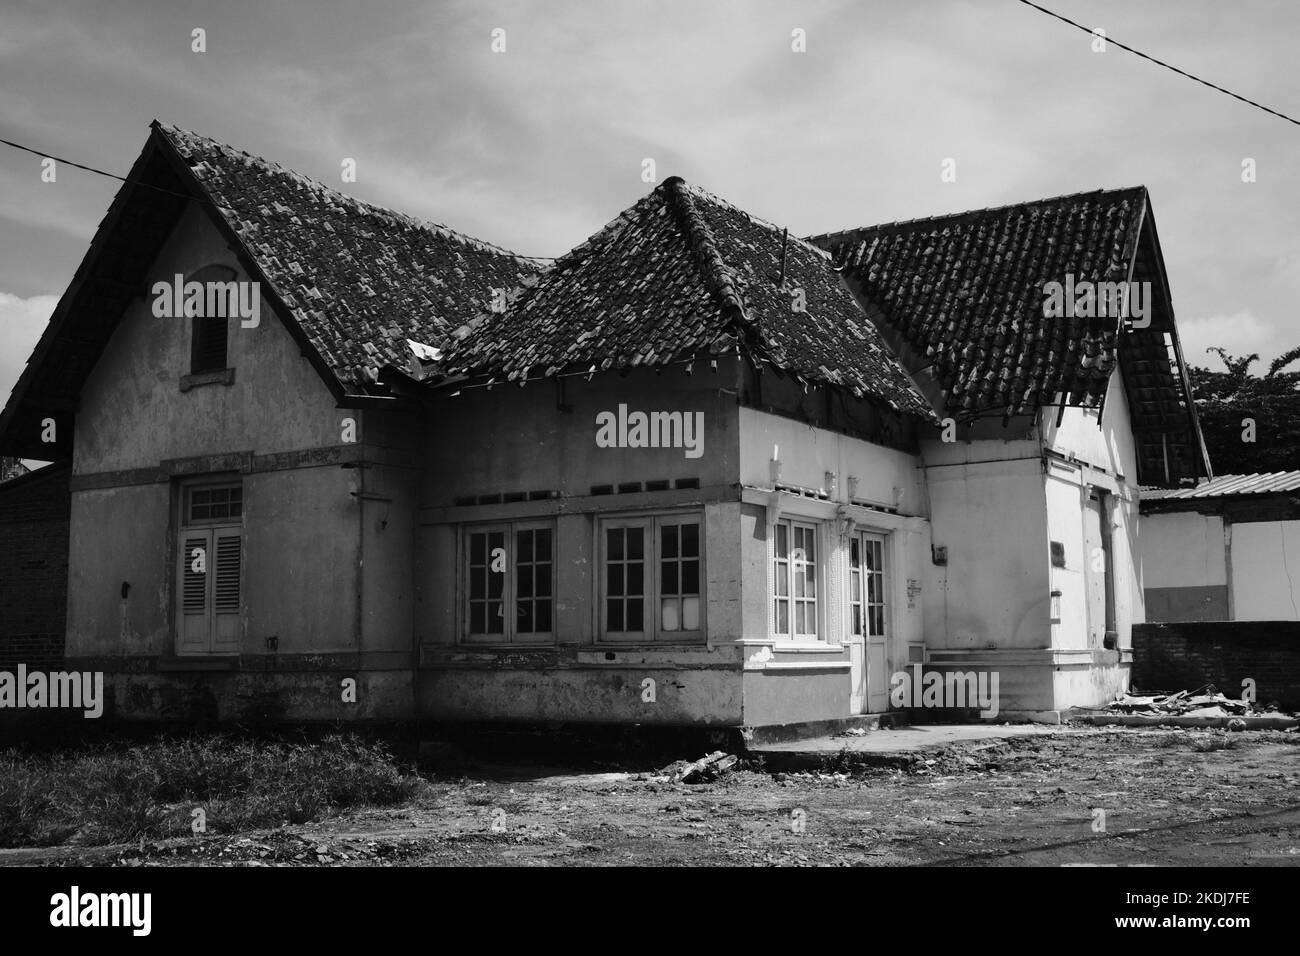 Cikancung, West Java, Indonesia - 24 October, 2022 :Black and white photo, Monochrome photo of a spooky old house Stock Photo